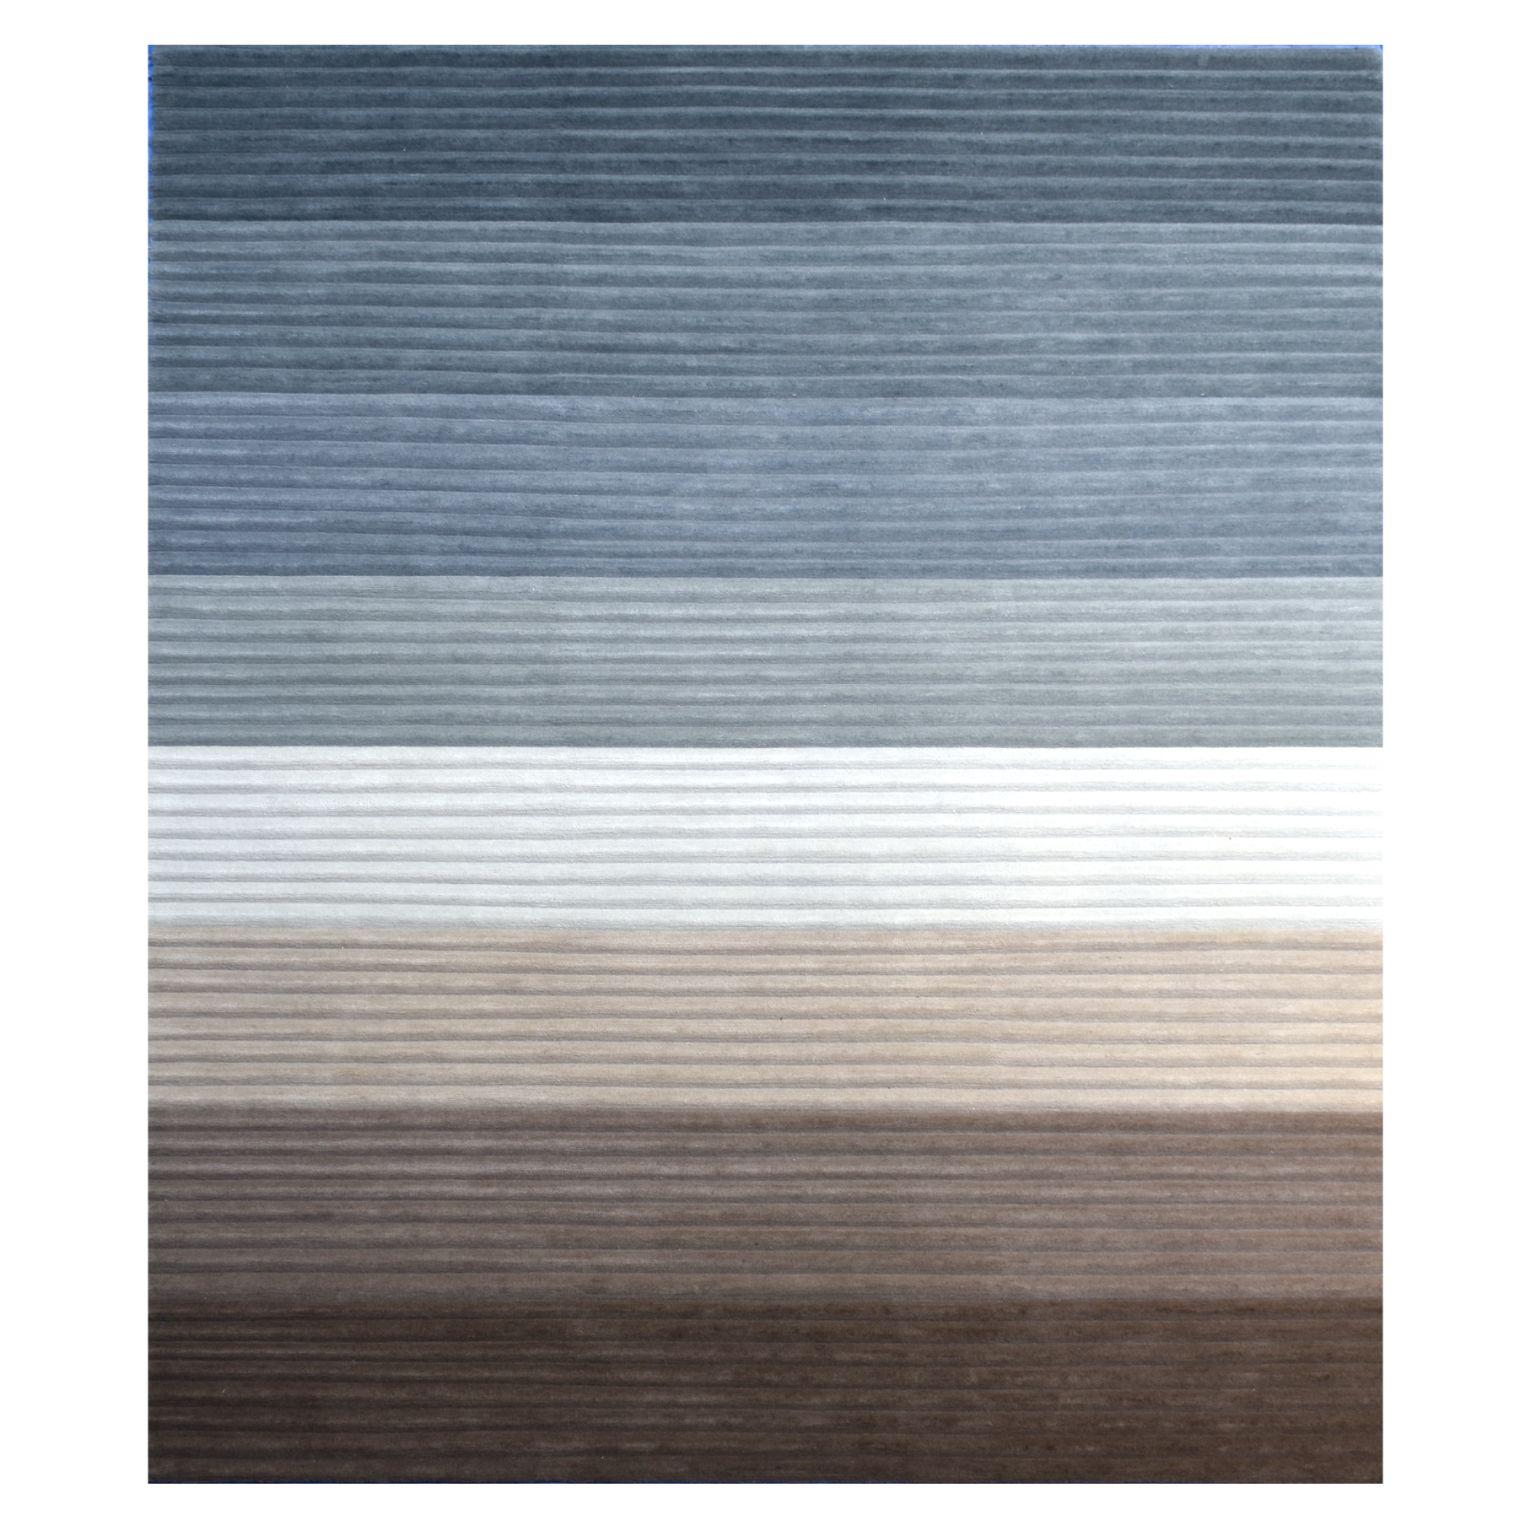 Corduroy small rug by Art & Loom
Dimensions: D 243.4 x H 304.8 cm
Materials: 100% New Zealand wool
Quality (Knots per Inch): 100
Also available in different dimensions.

Samantha Gallacher has always had a keen eye for aesthetics, drawing